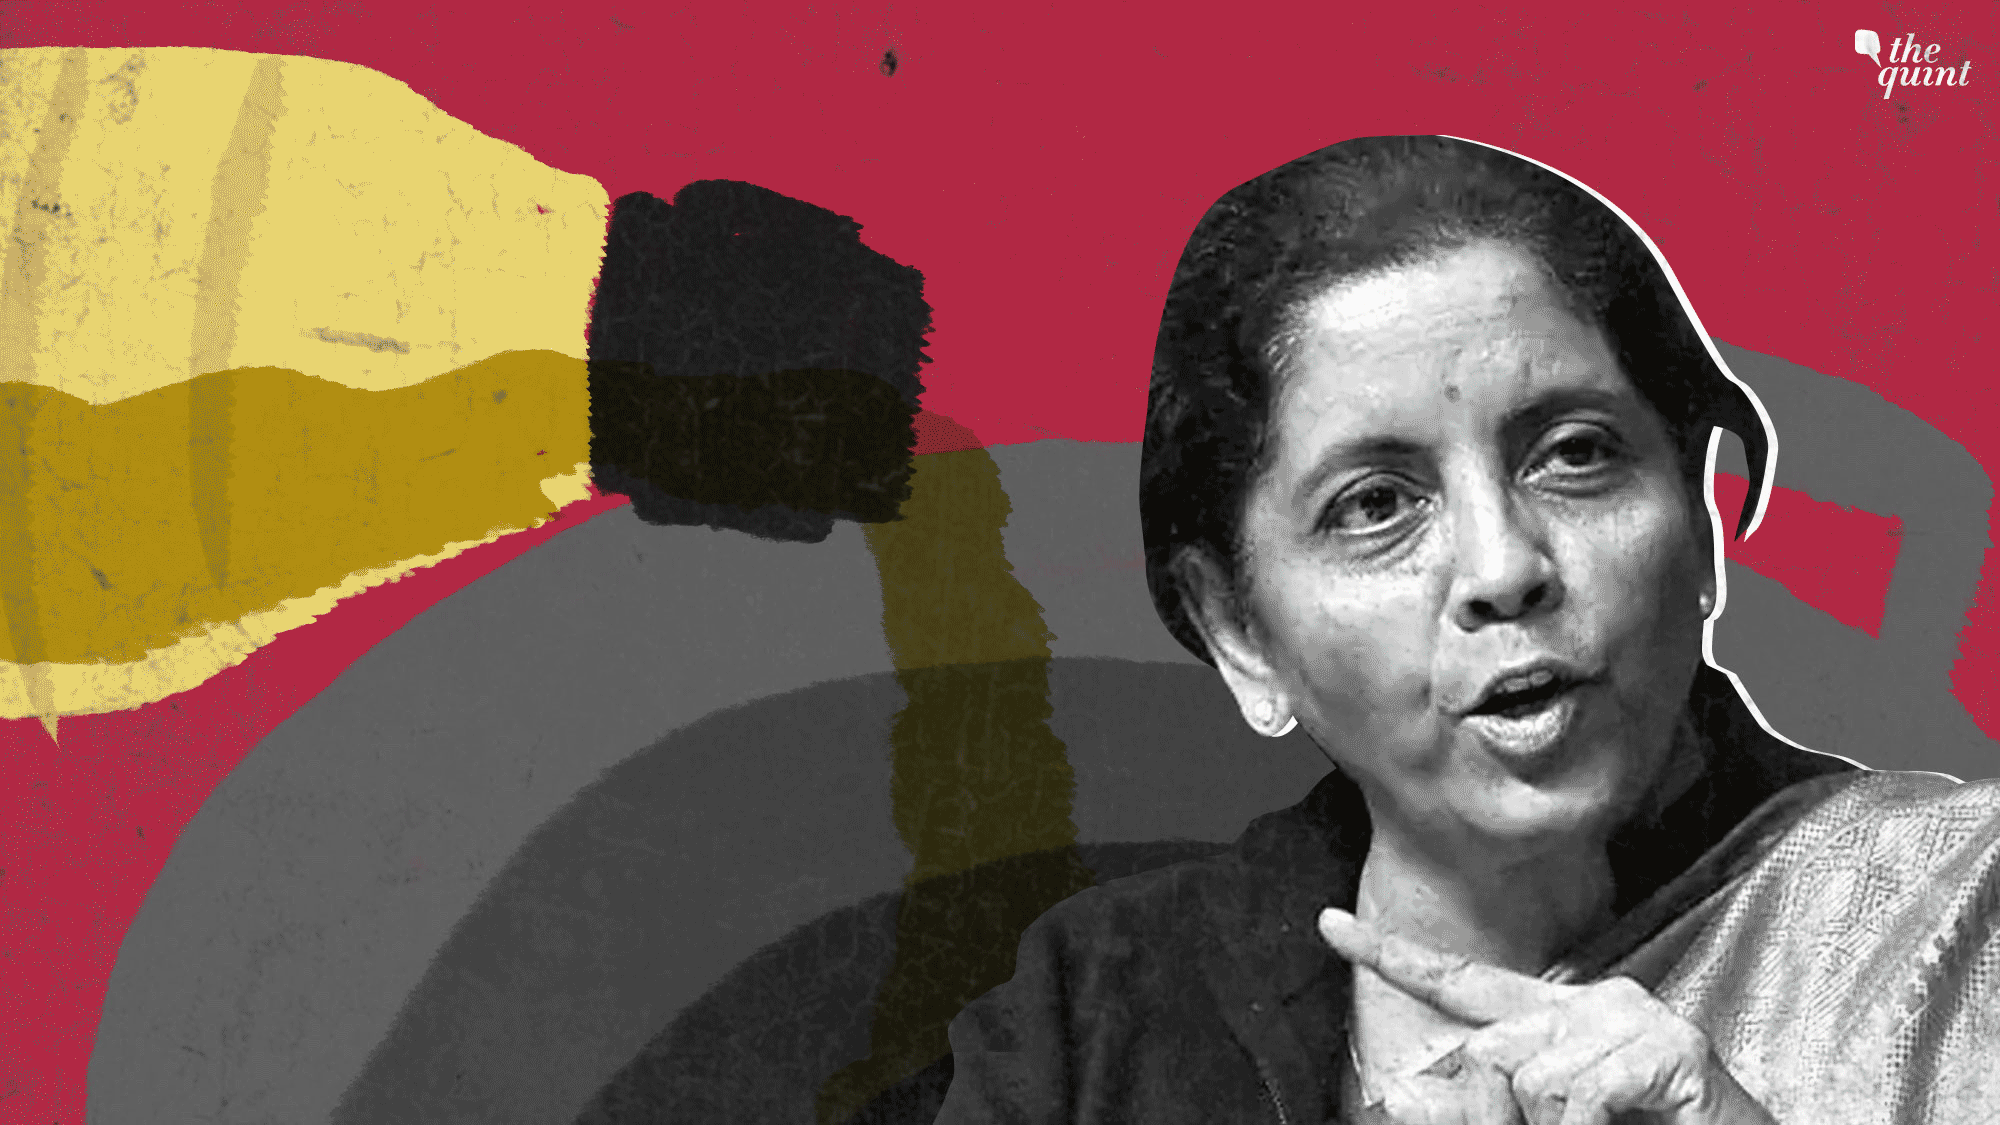 Finance Minister Nirmala Sitharaman Wants India To Be Self Sufficient In Cooking Oil: Is This Possible Given Our Eating Habits And Agriculture Practices?